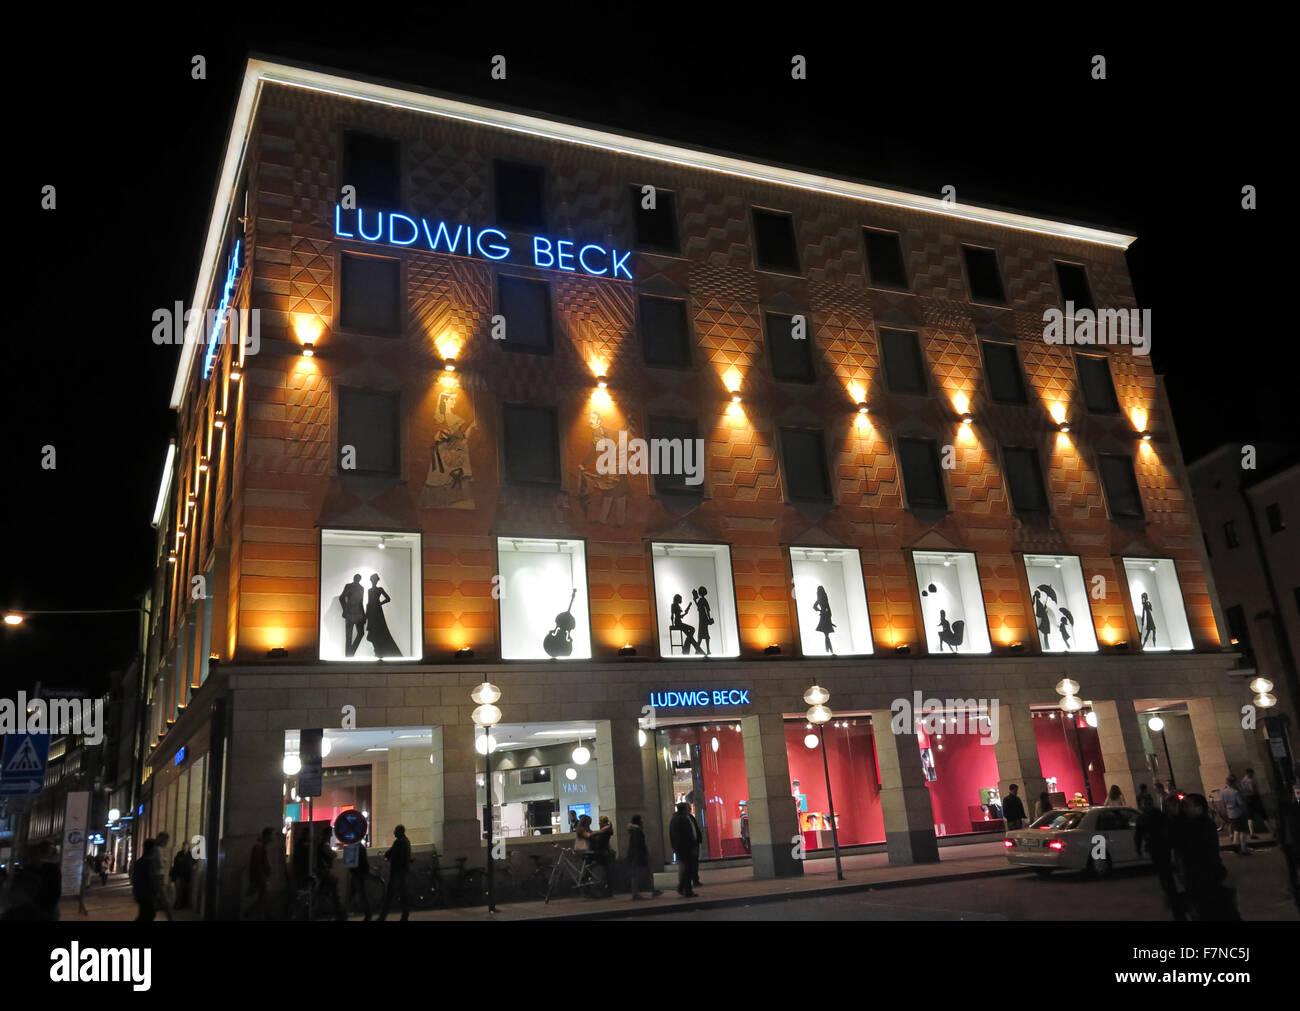 Ludwig Beck department store, Munich, Germany at night Stock Photo